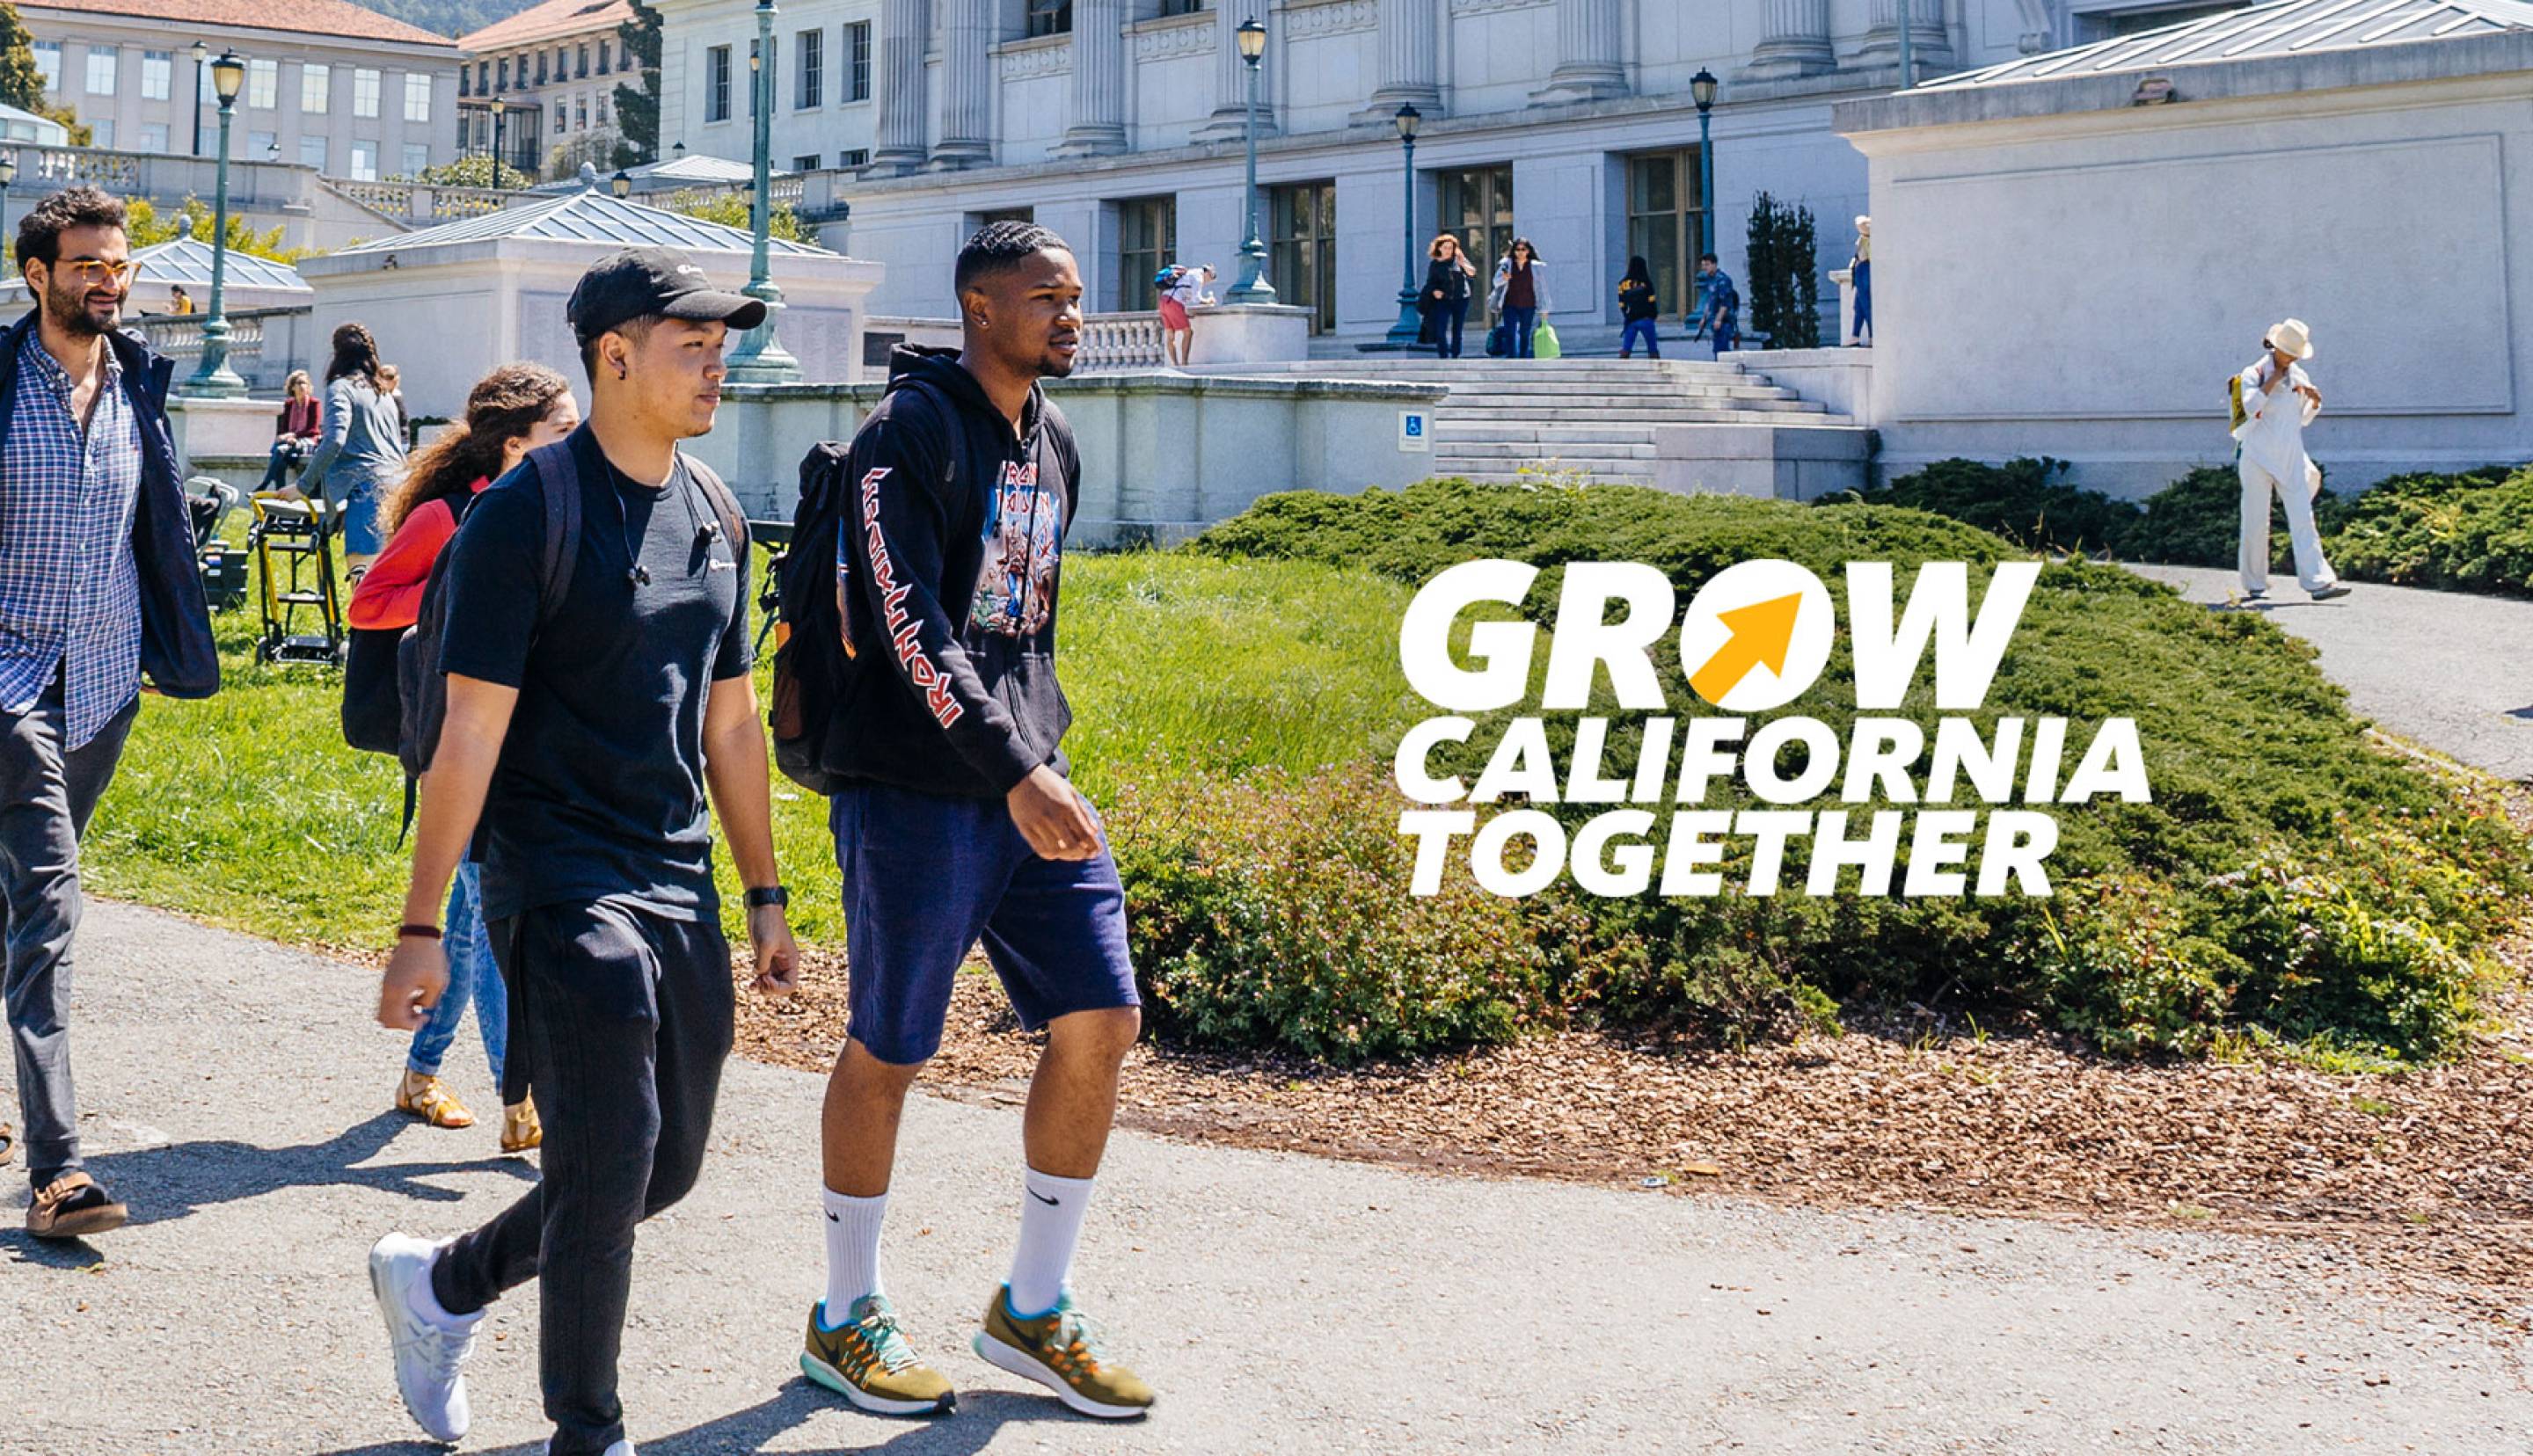 Students on campus with the words "Grow California Together"